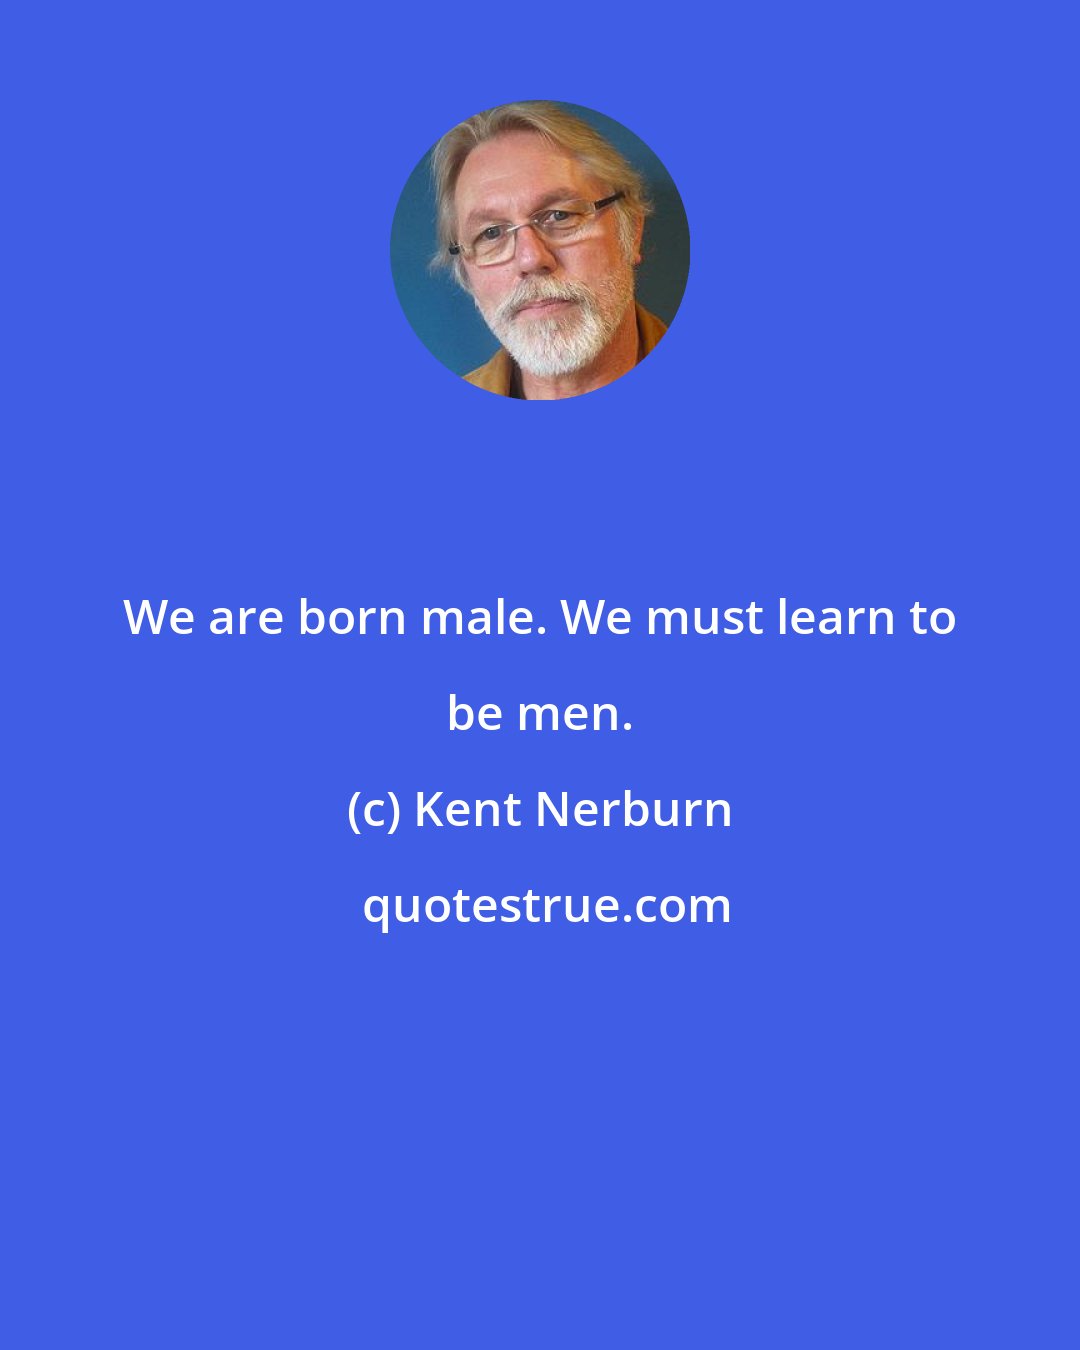 Kent Nerburn: We are born male. We must learn to be men.